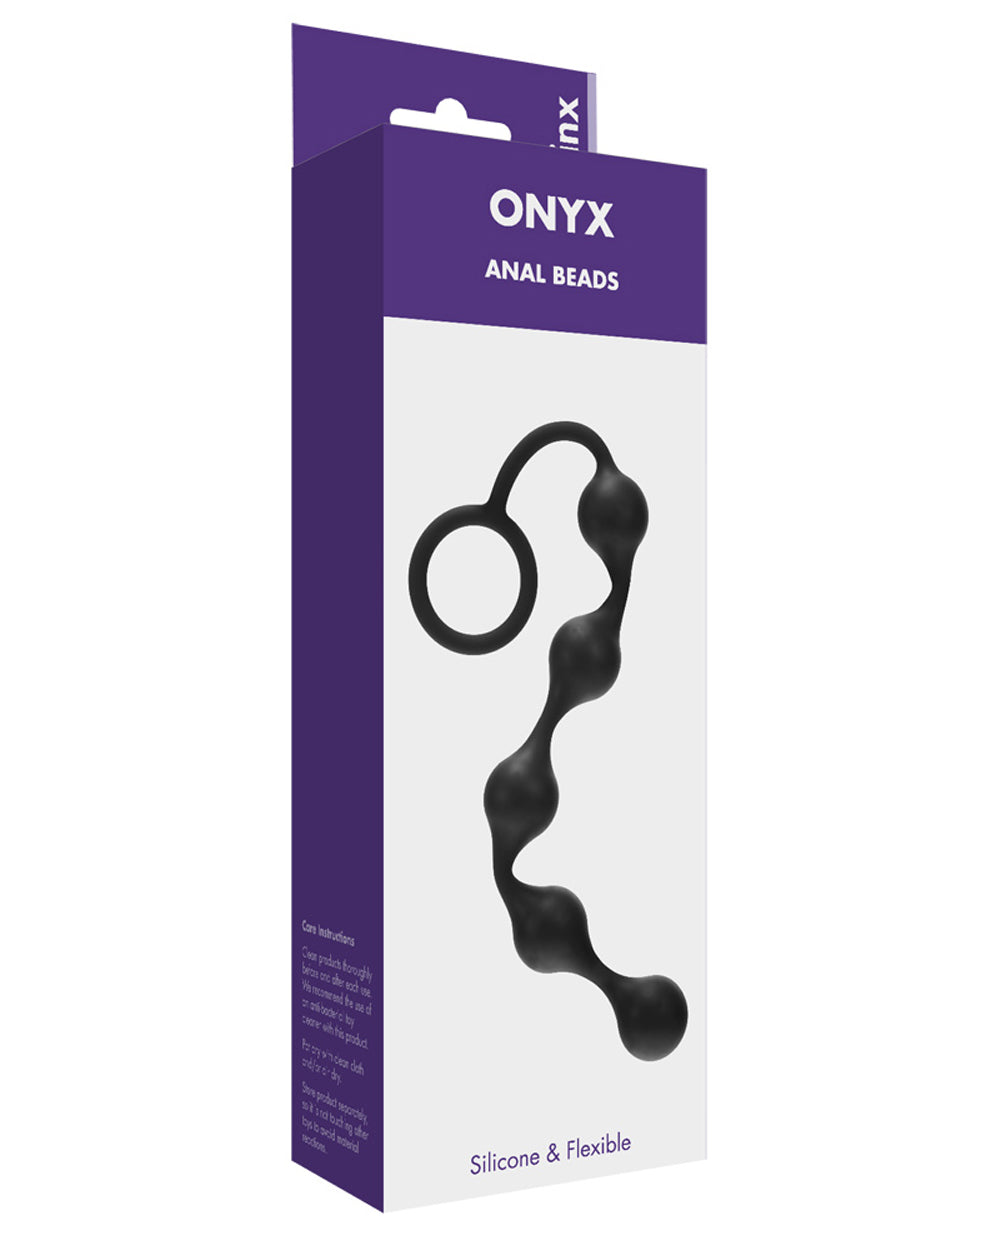 ONYX SILICONE ANAL BEADS.